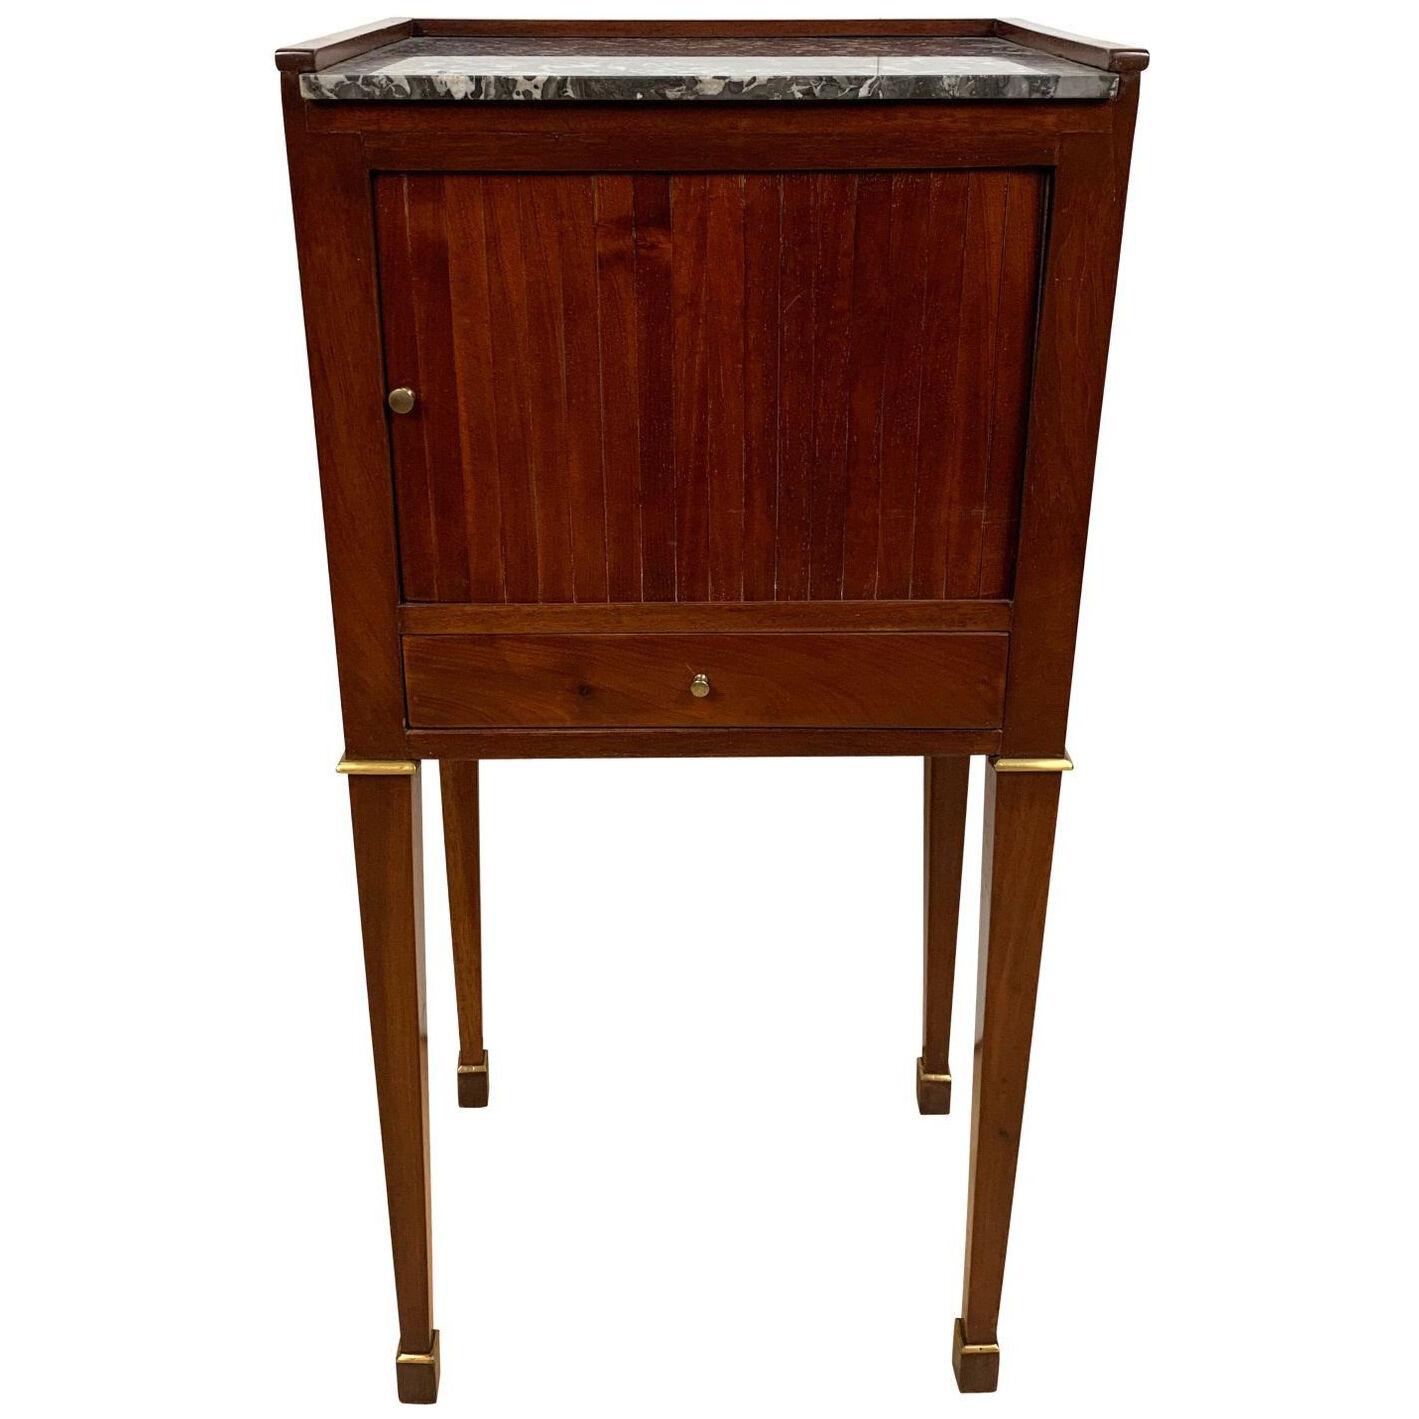 Early 19th century Small Furniture or Nightstand, France circa 1820